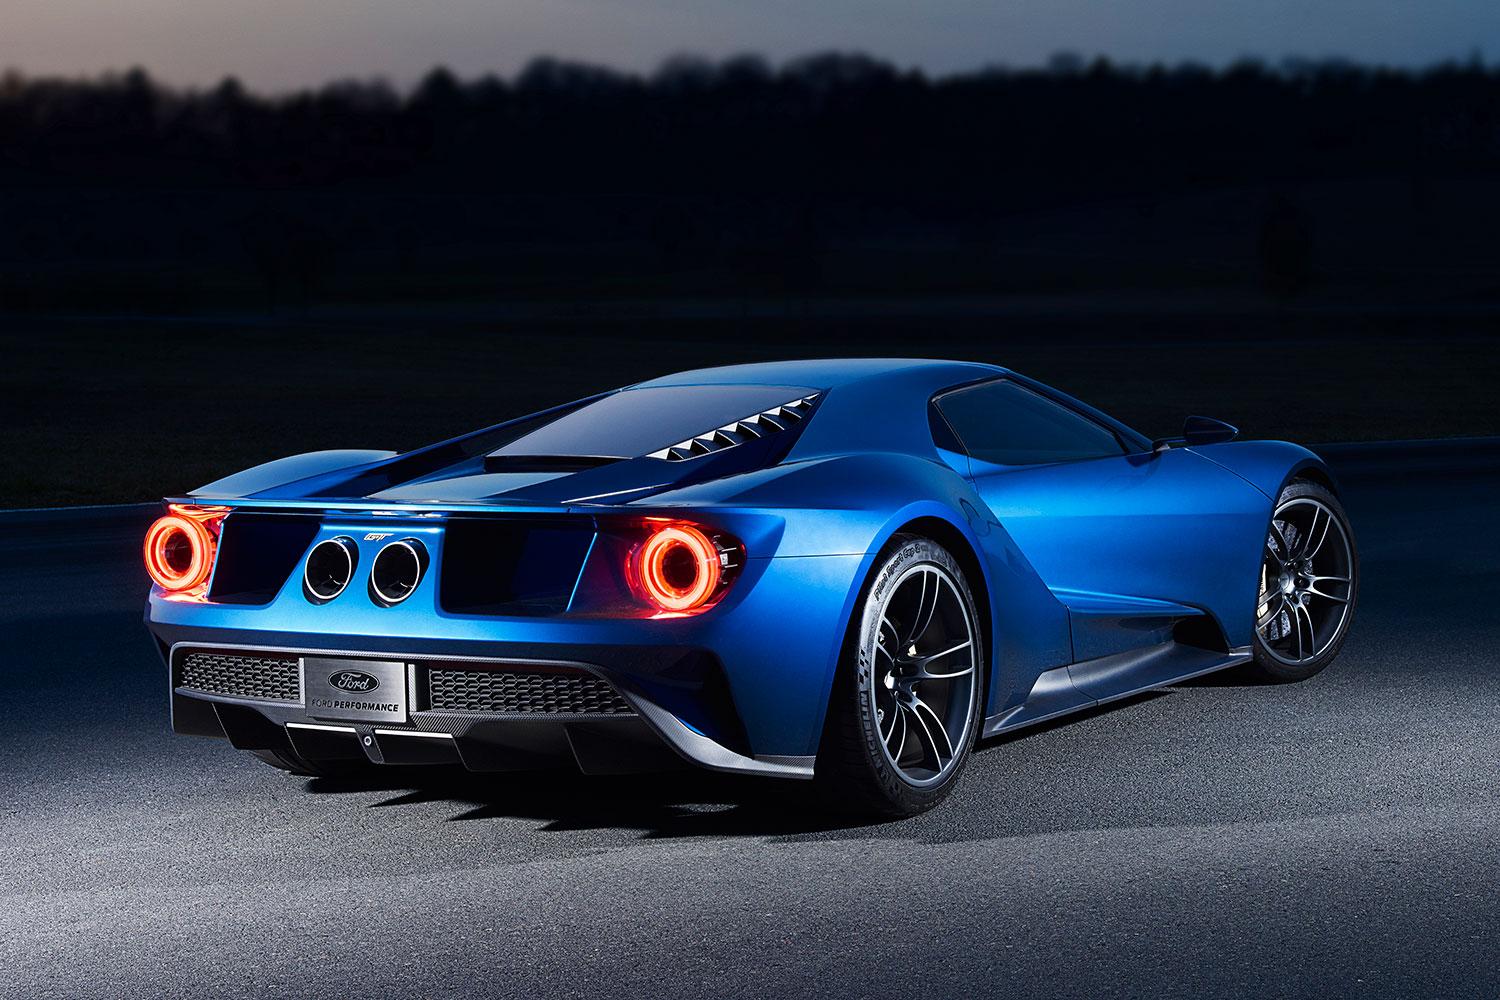 meet the man who sculpted softer side of fords hardcore 2016 gt all newfordgt 07